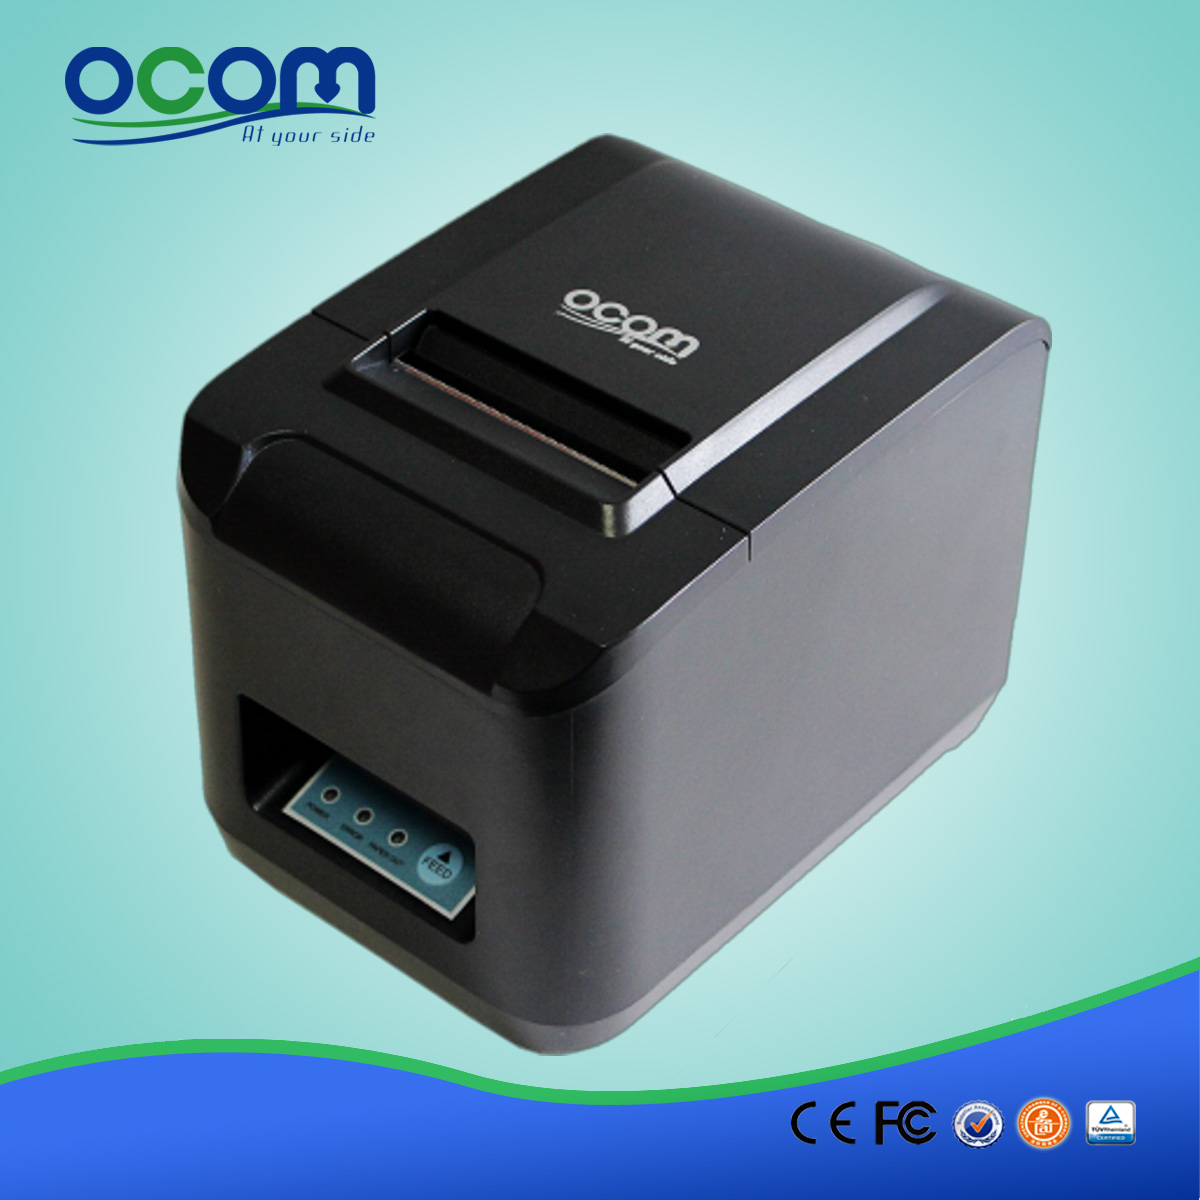 China 80mm Wifi Thermal Receipt Printer Factory